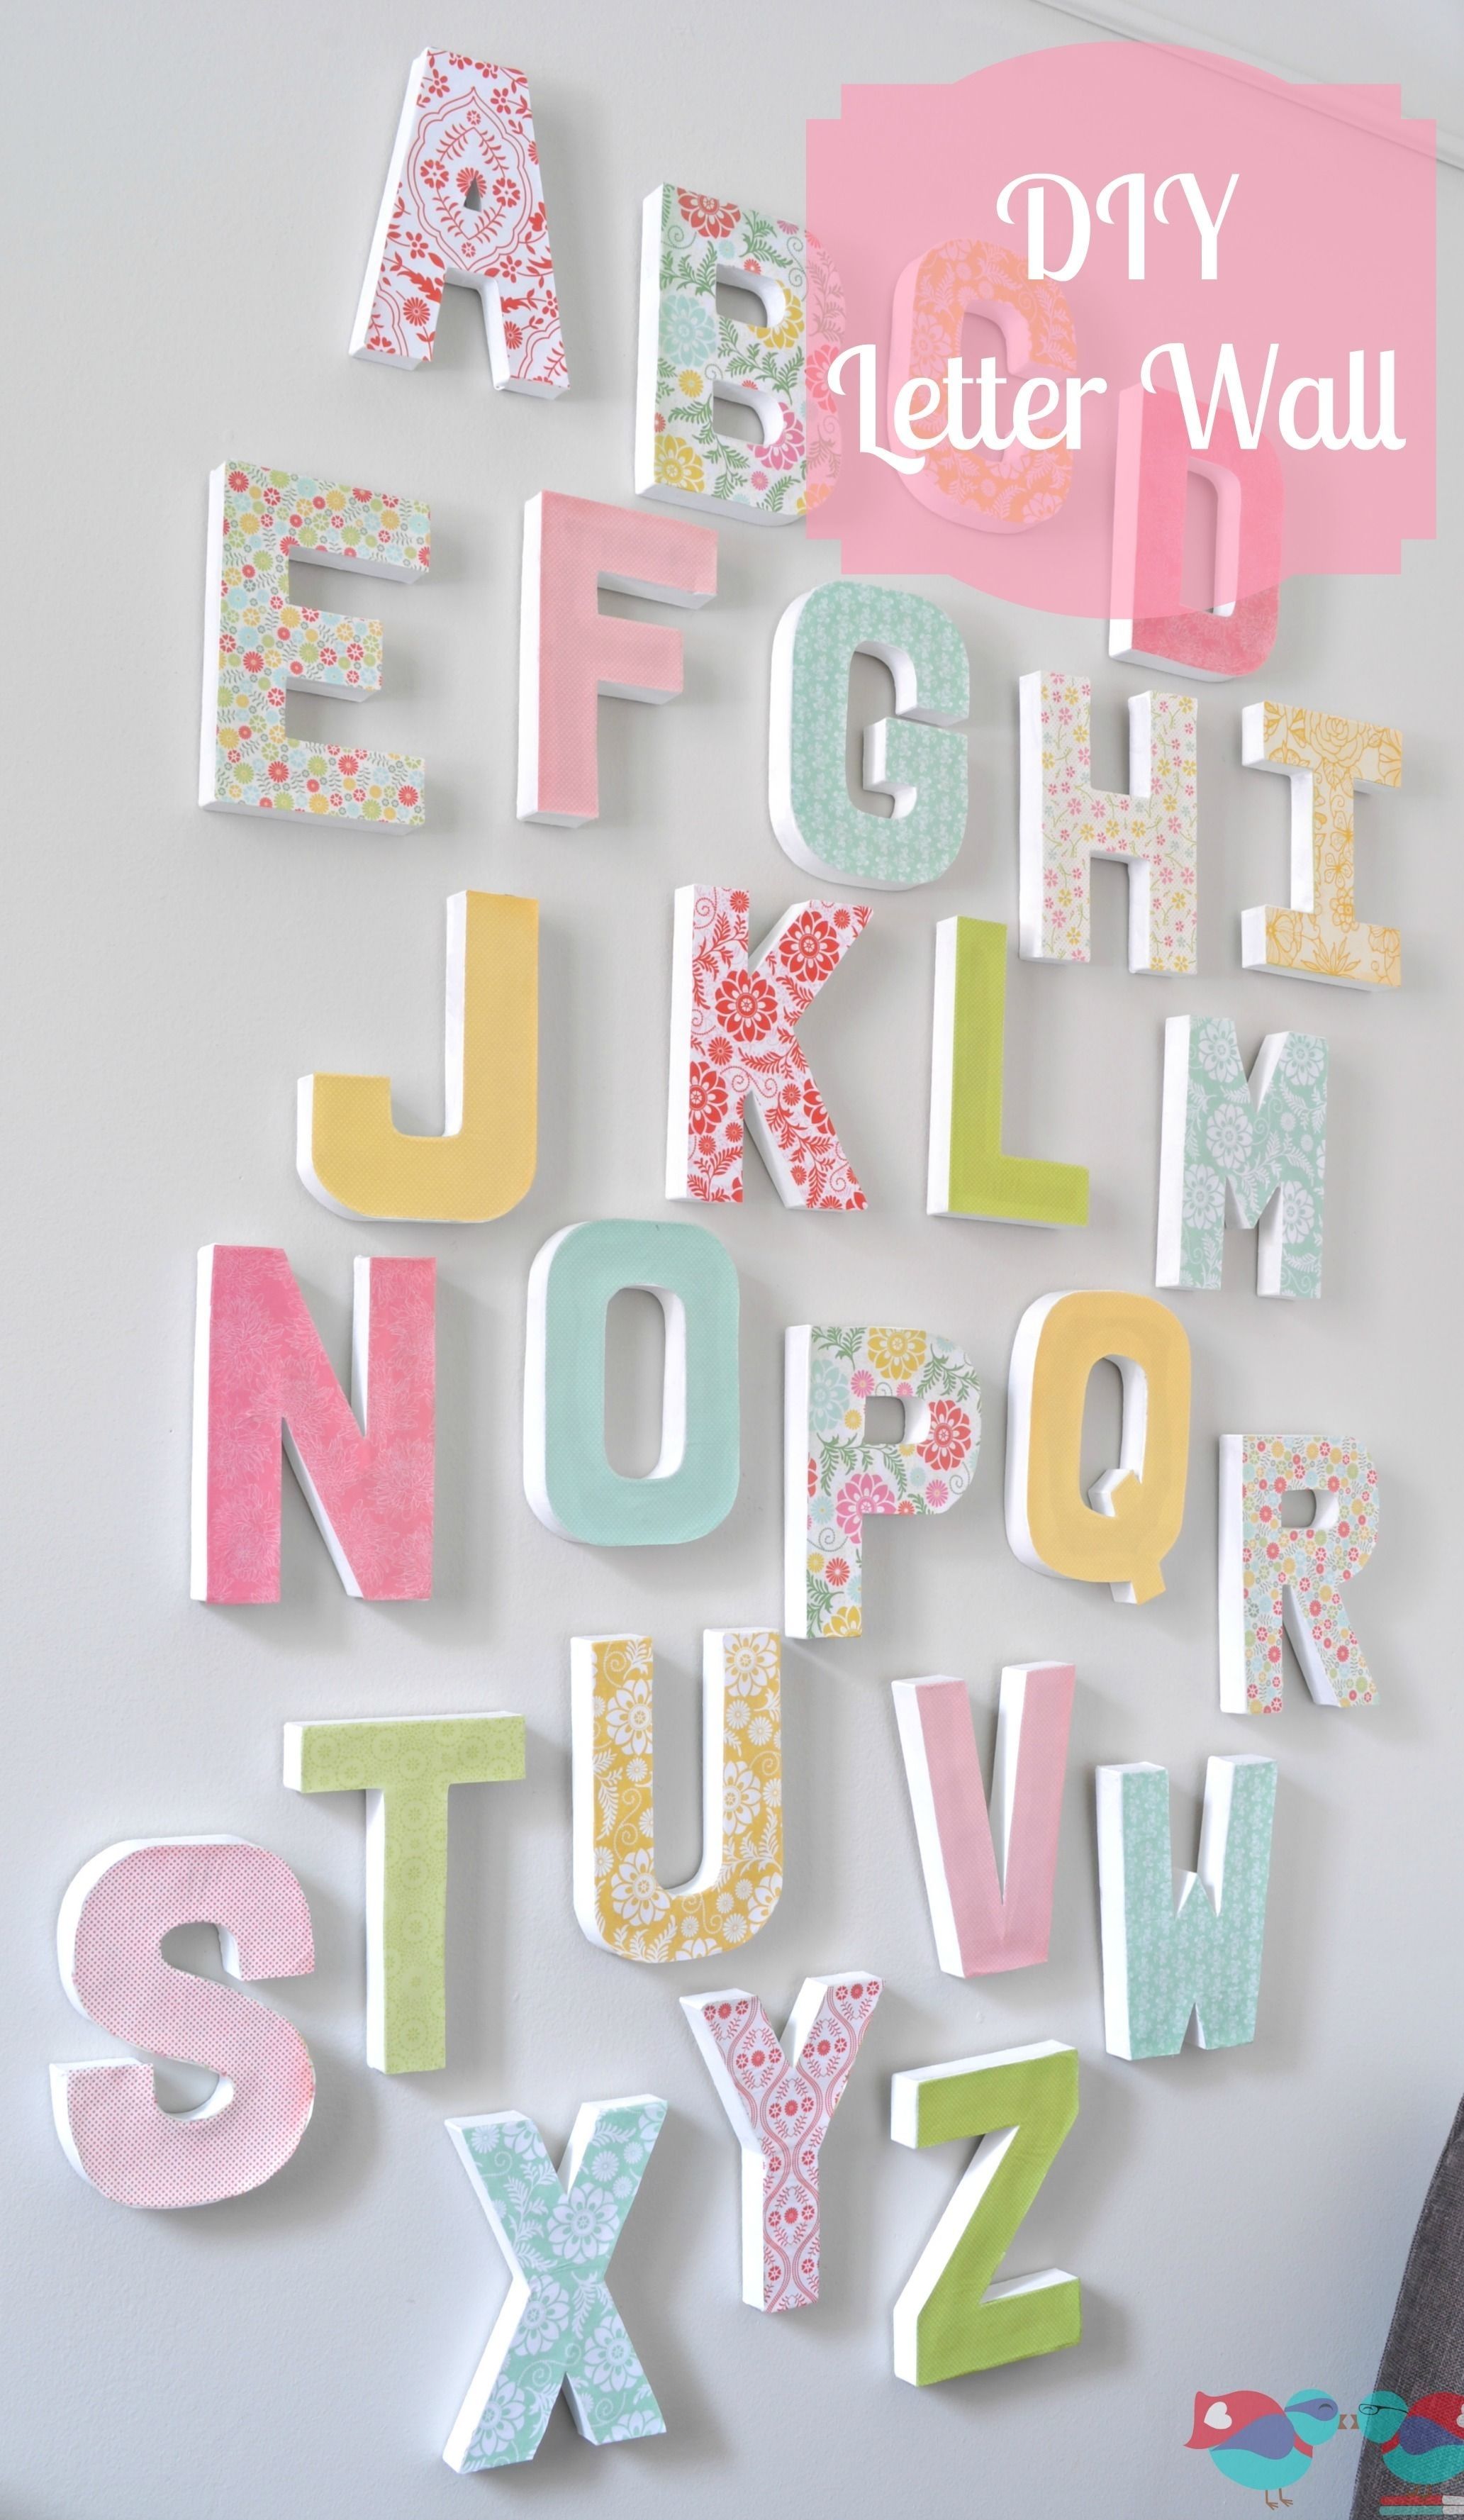 Diy Letter Wall Decor | Craft With Joann | Pinterest | Diy Letters Inside Letter Wall Art (View 3 of 20)